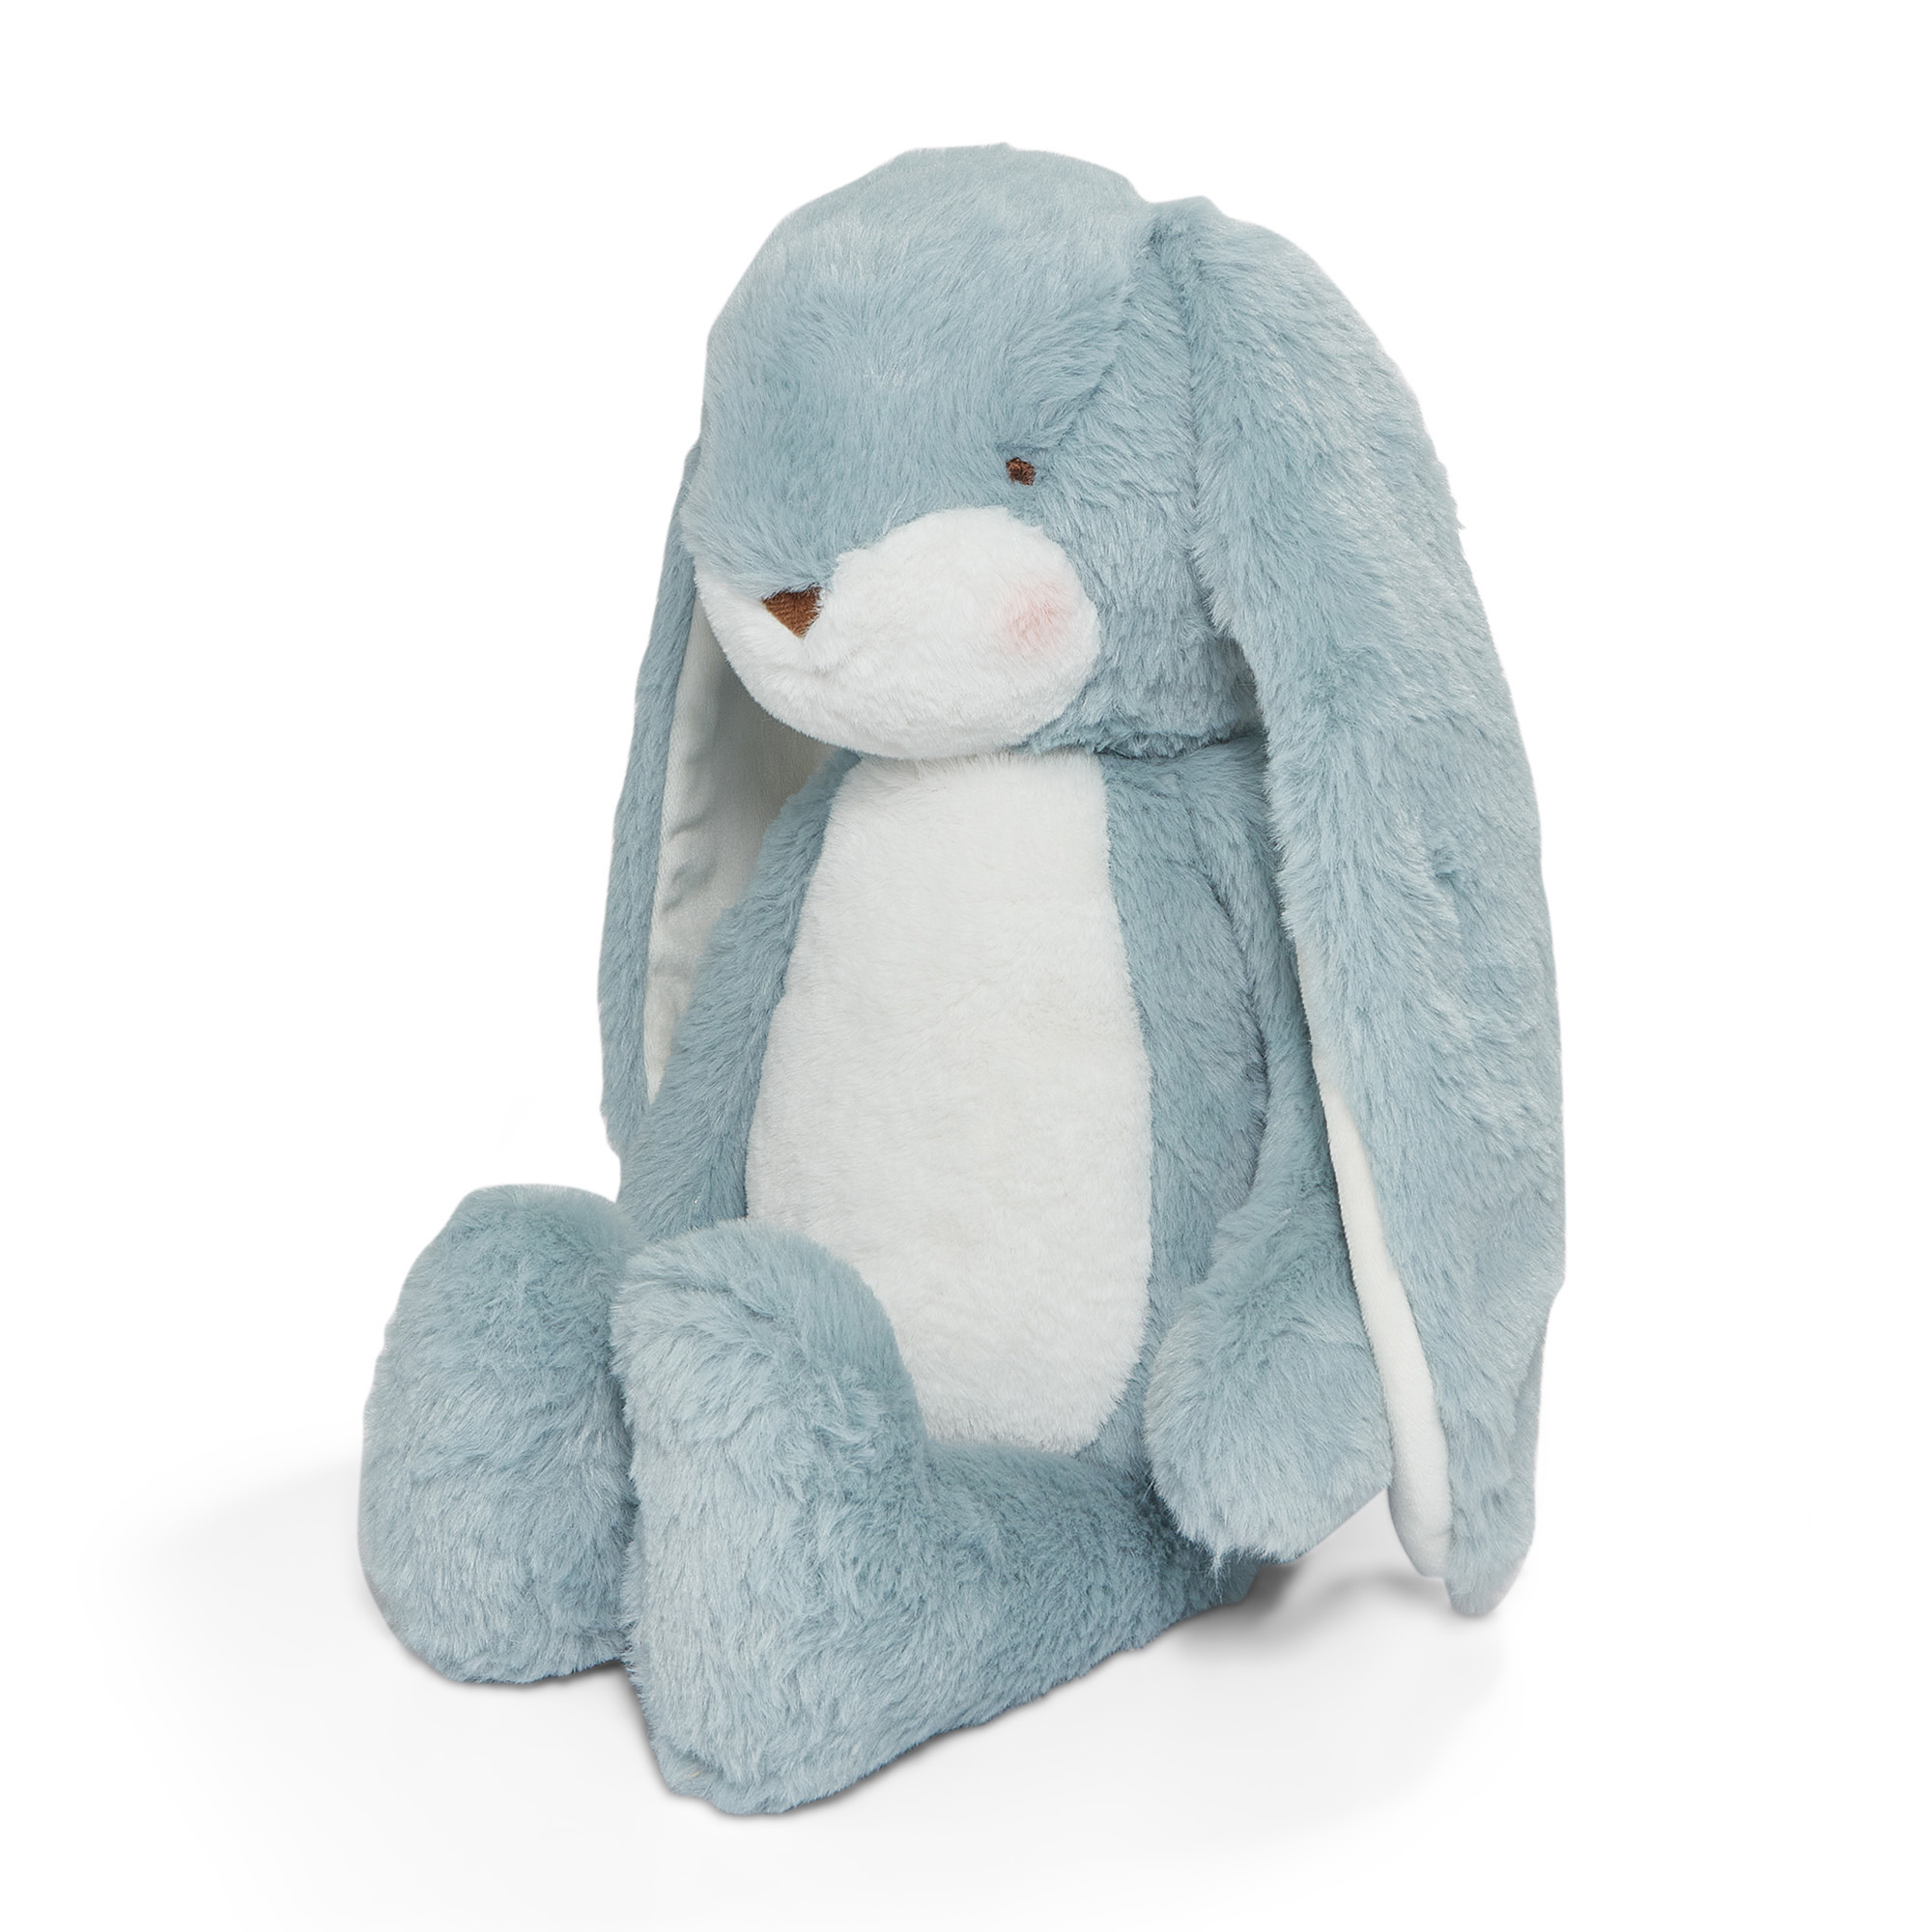 Peluche big nibble floppy stormy blue 50cm - Bunnies By The Bay